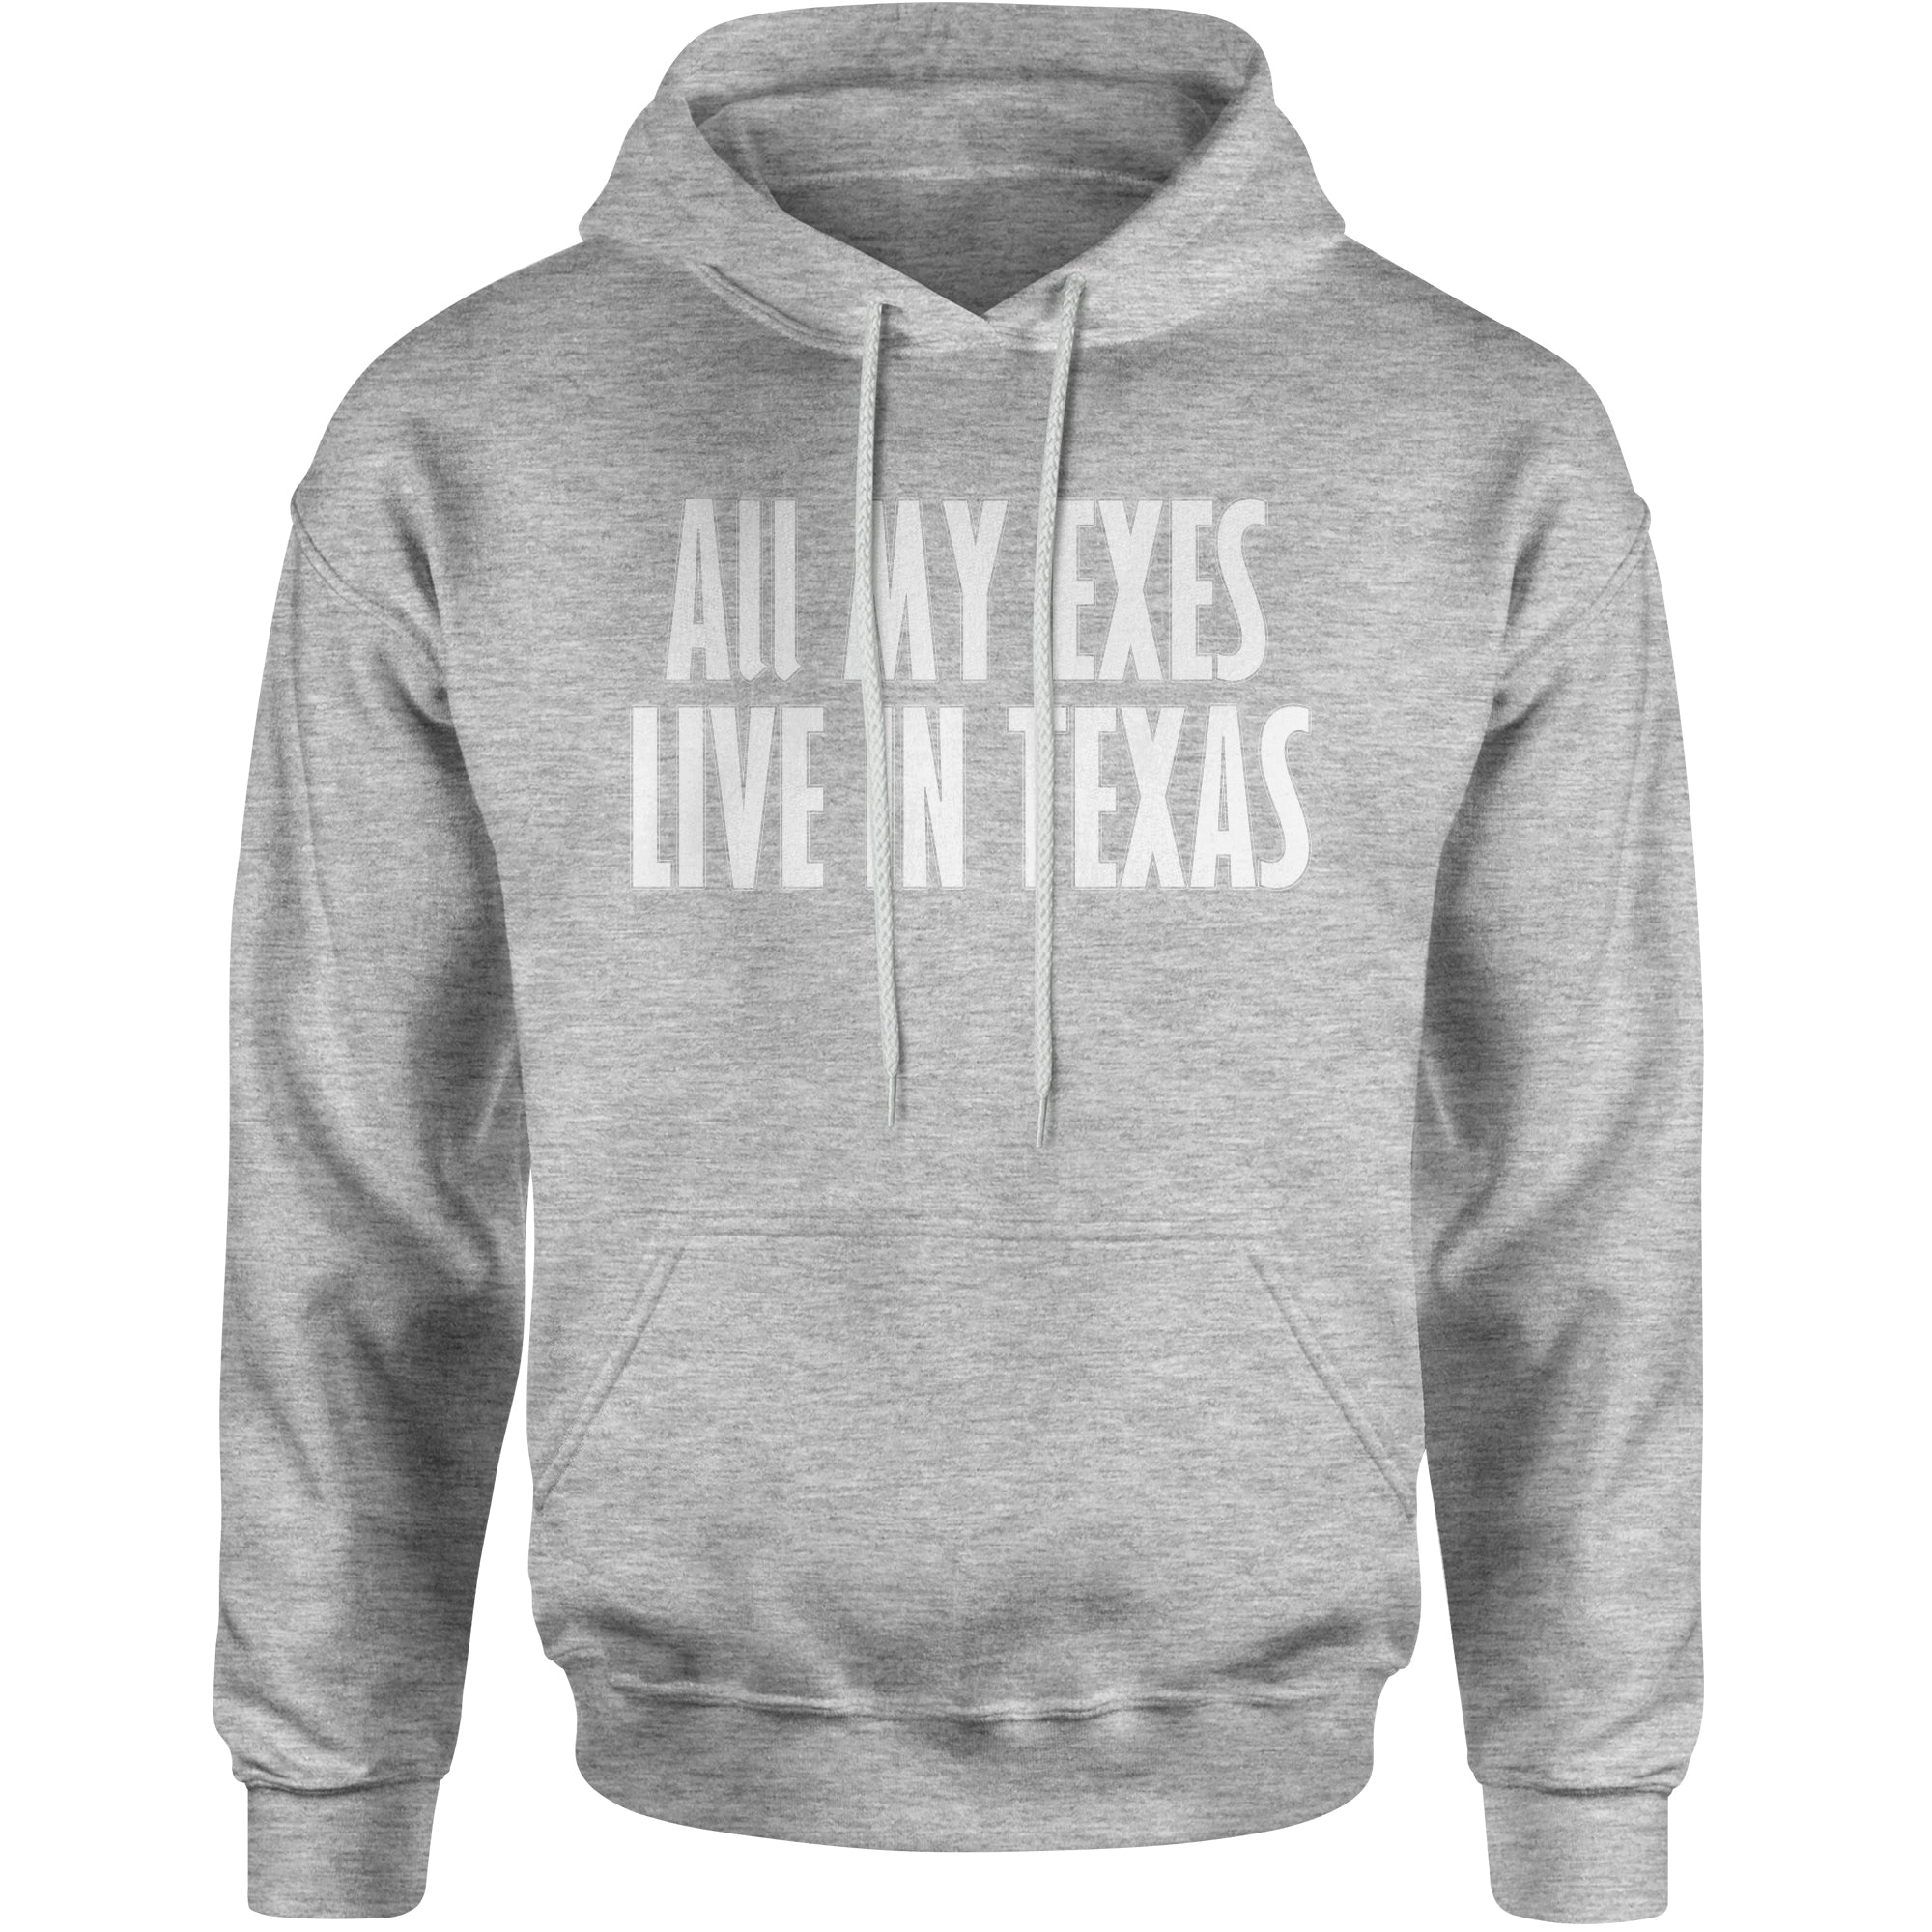 All My Exes Live In Texas  Hoodie